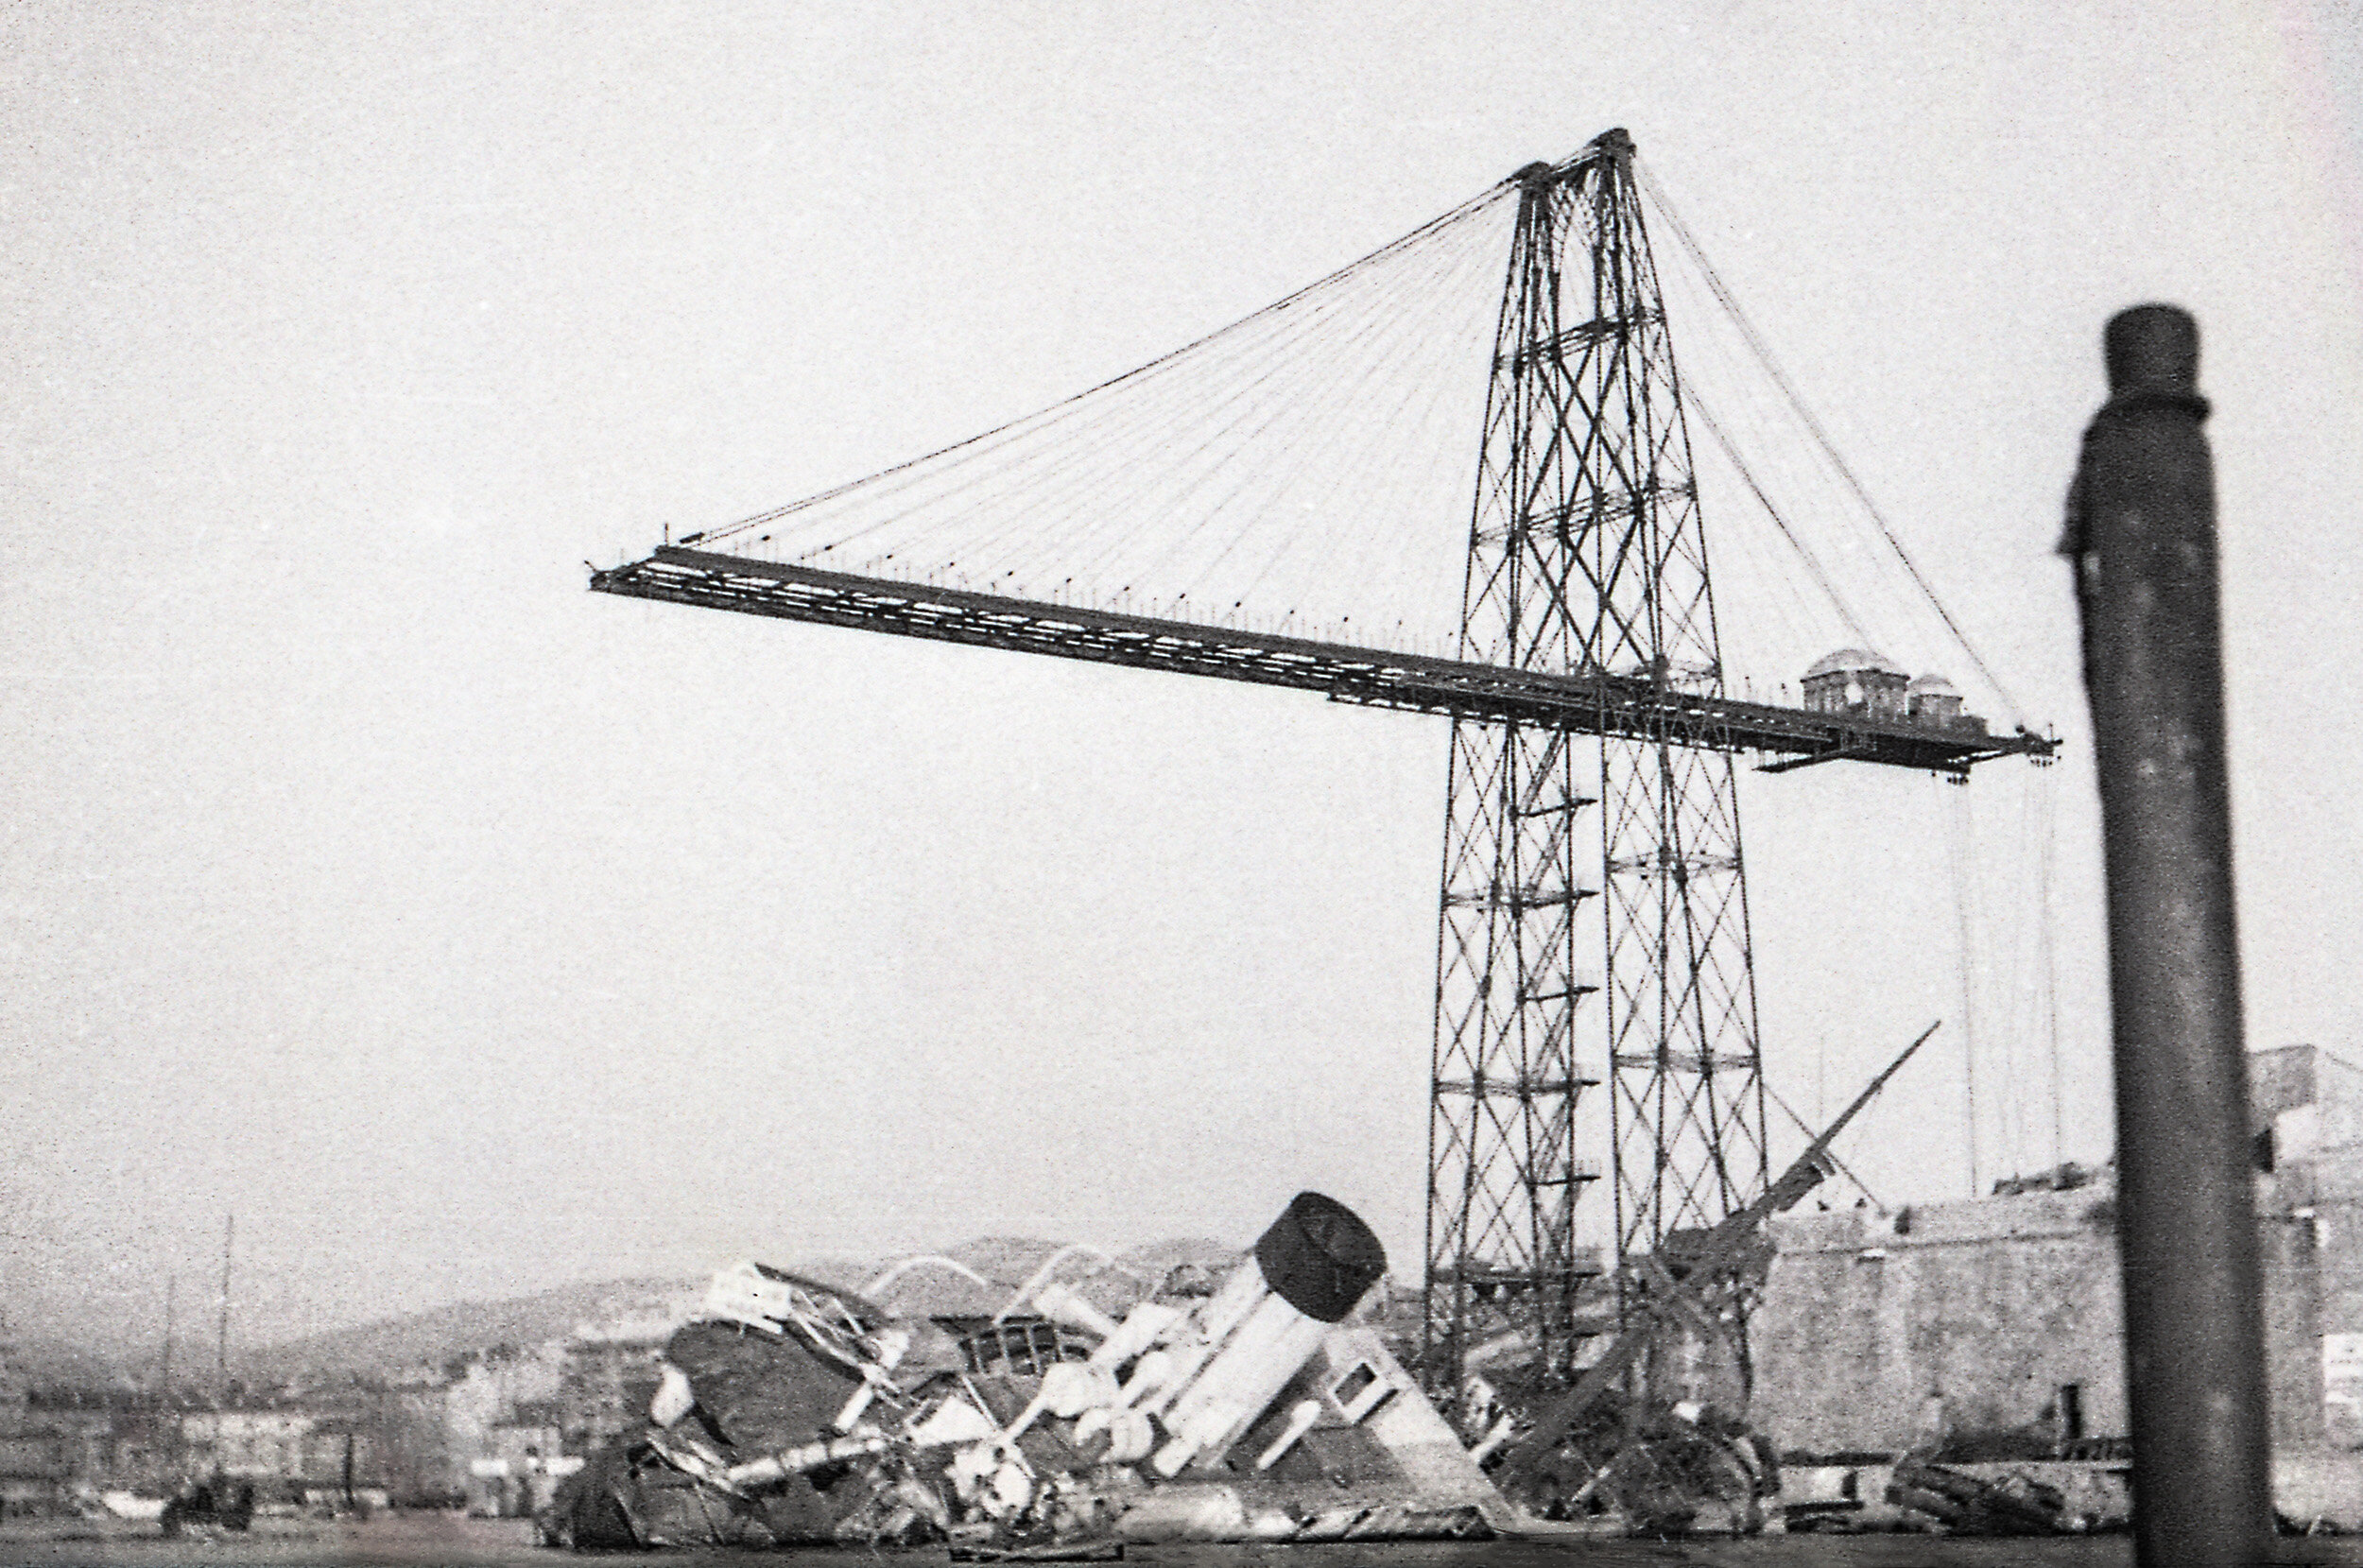 Port of Marseille in WWII, with ship wreckage and remains of the Marseille Transporter Bridge